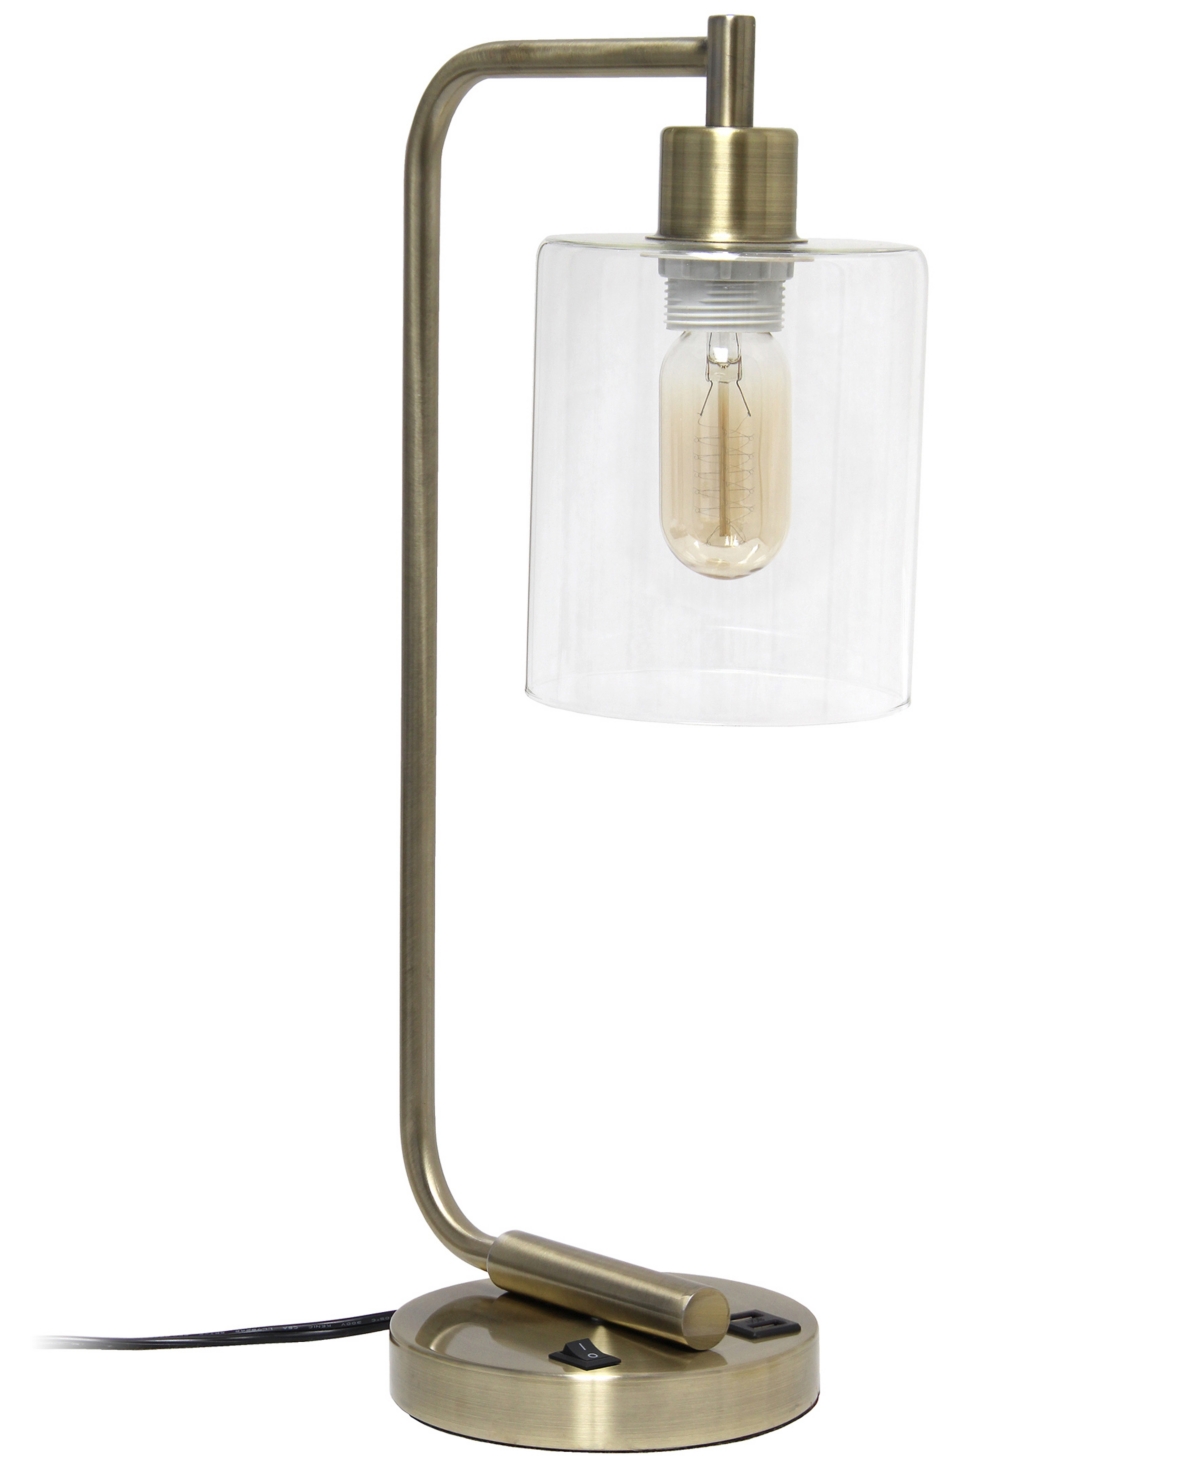 Shop Lalia Home Modern Iron Desk Lamp With Usb Port And Glass Shade, Antique Brass